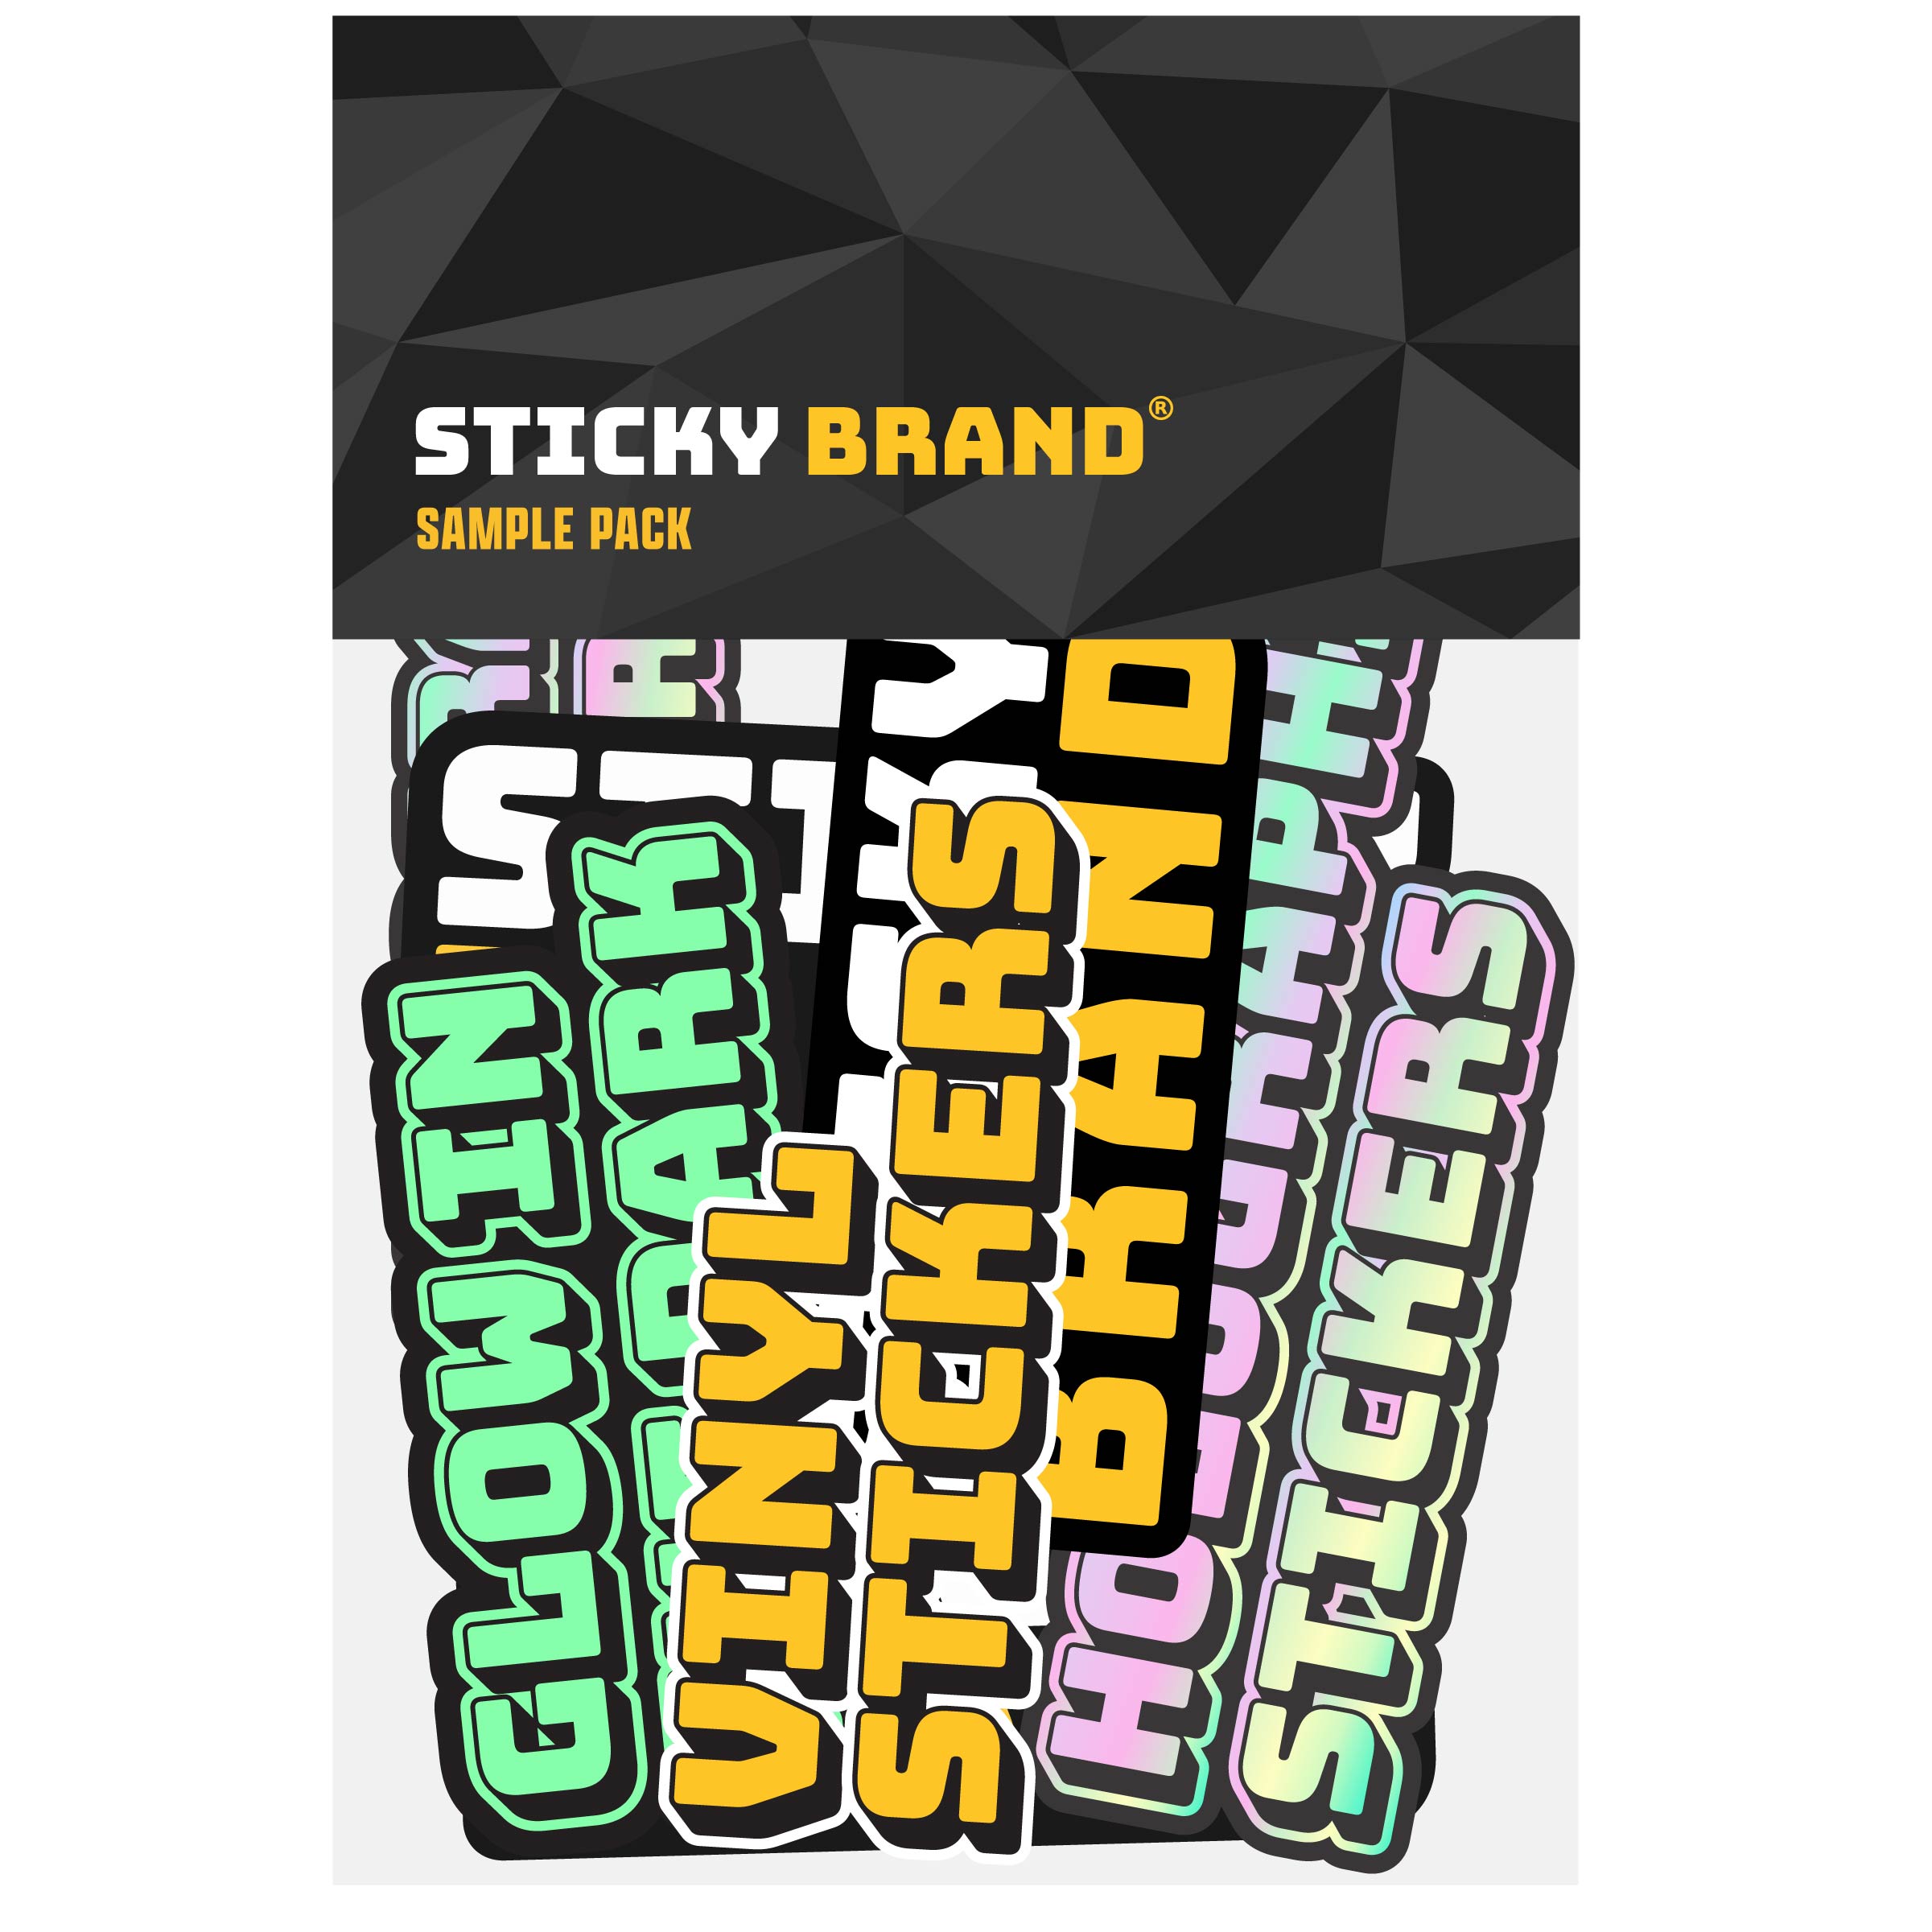 Free Sample Pack of Custom Stickers, Labels & Decals – Sticky Brand